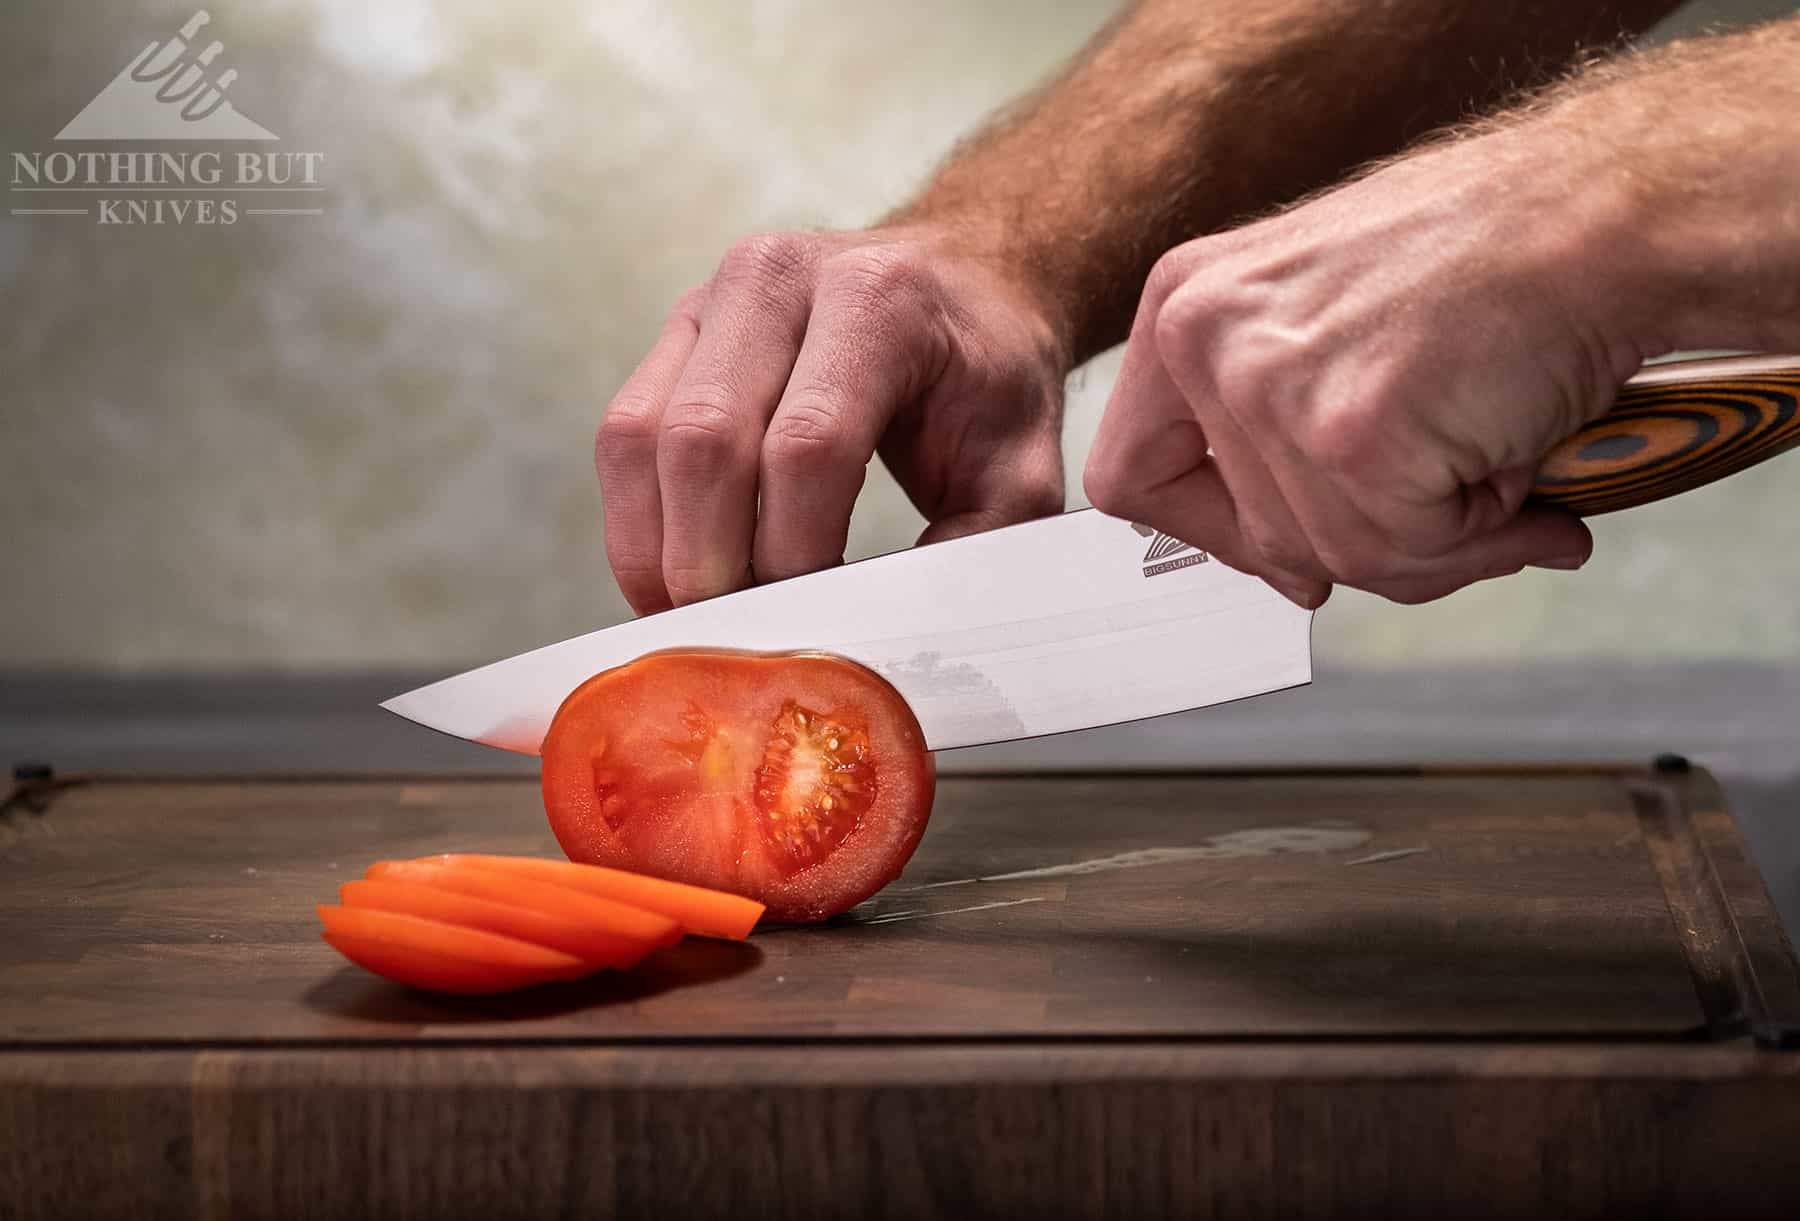 The BigSunny 8 inch chef knife effortlessly sliced tomatoes and other vegetables. It is an excellent budget chef knife.